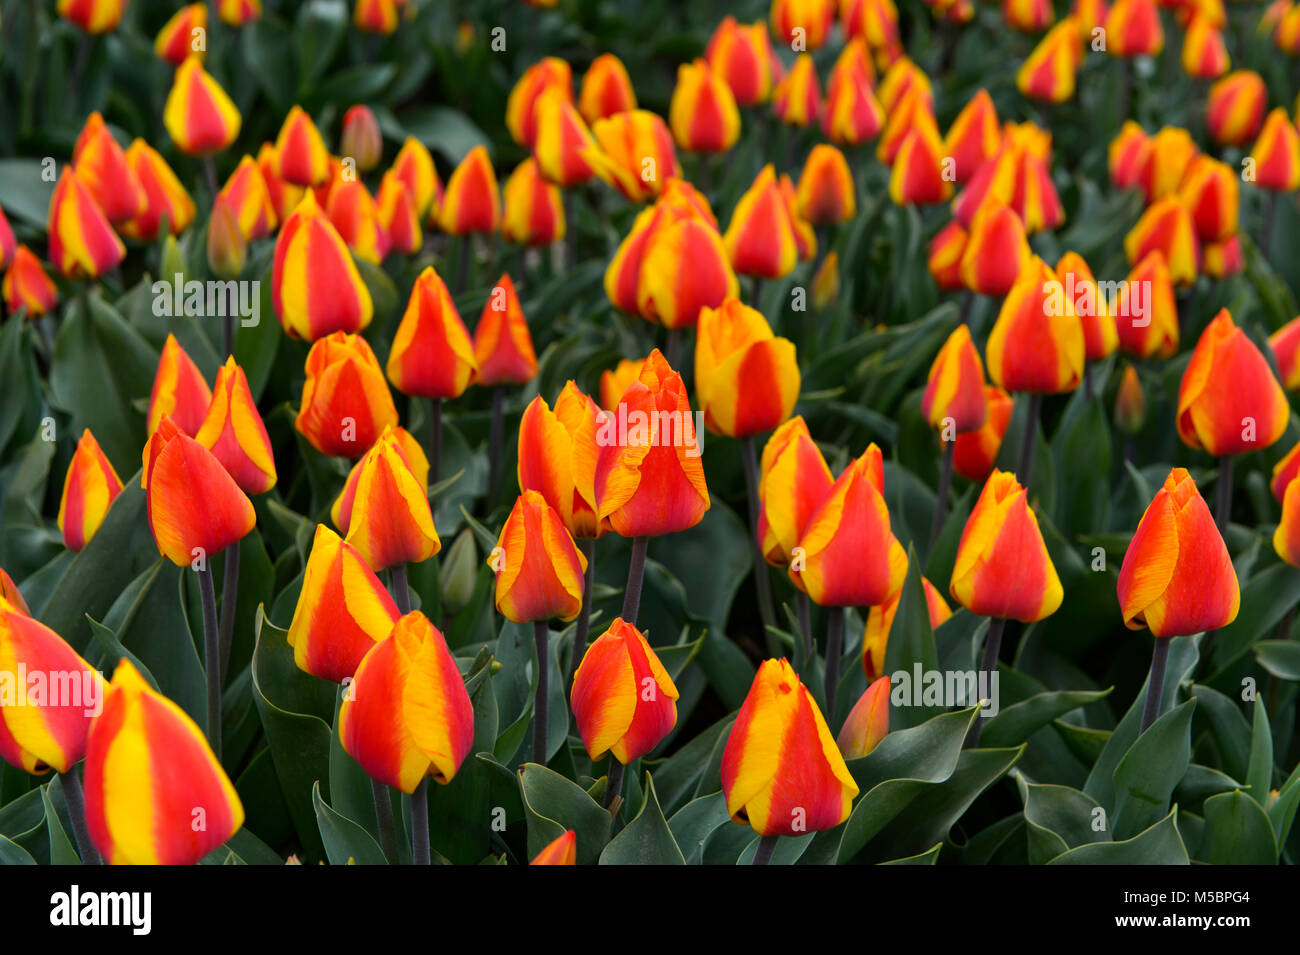 Field of red and yellow flamed Dutch tulips, Bollenstreek, Netherlands Stock Photo